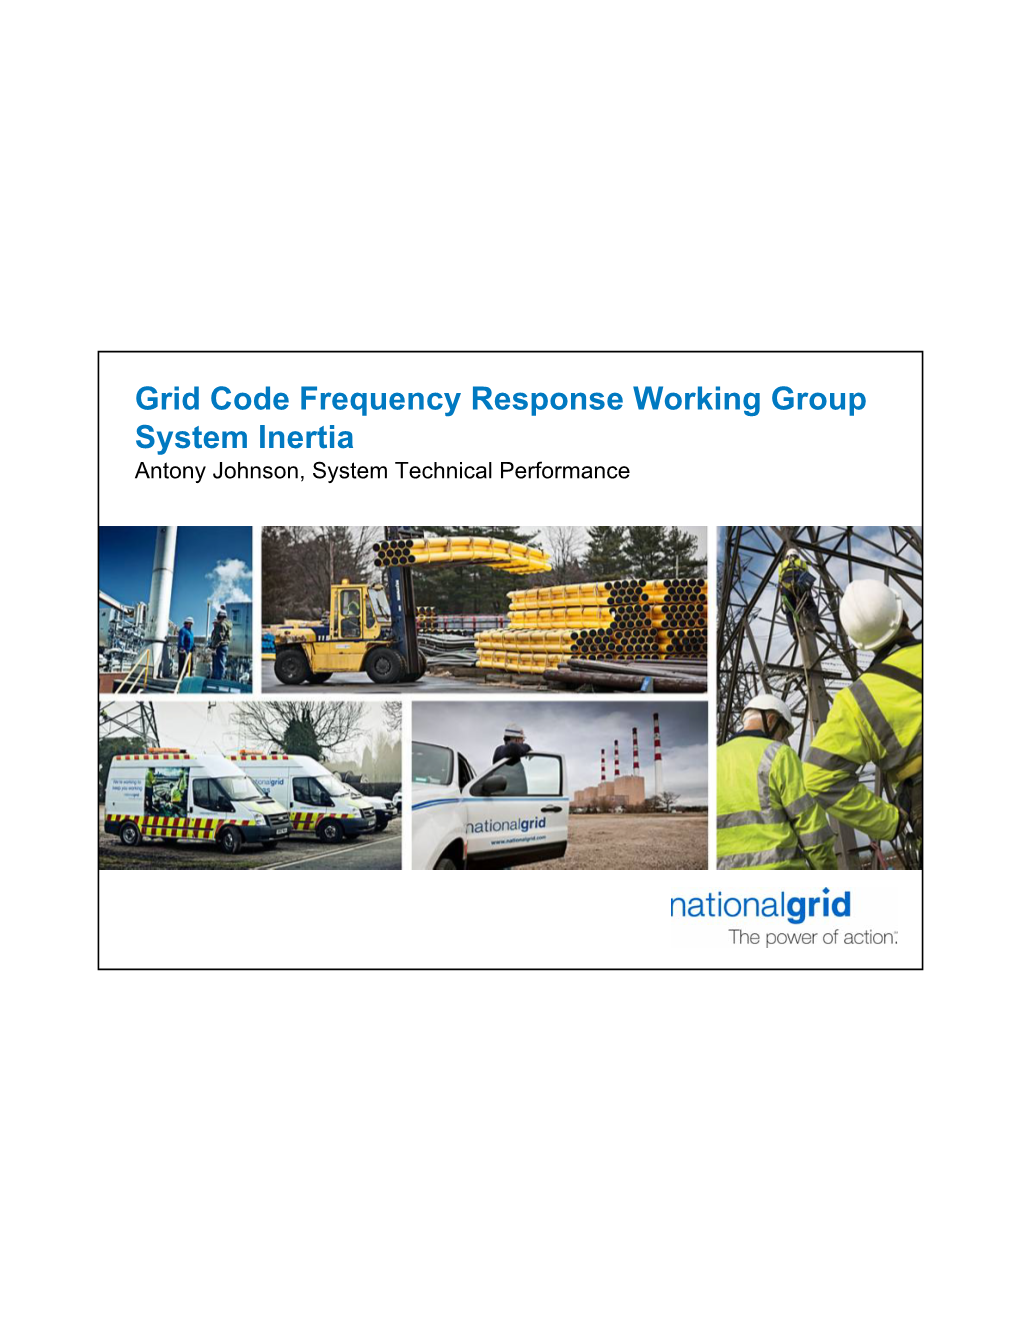 Grid Code Frequency Response Working Group System Inertia Antony Johnson, System Technical Performance Overview